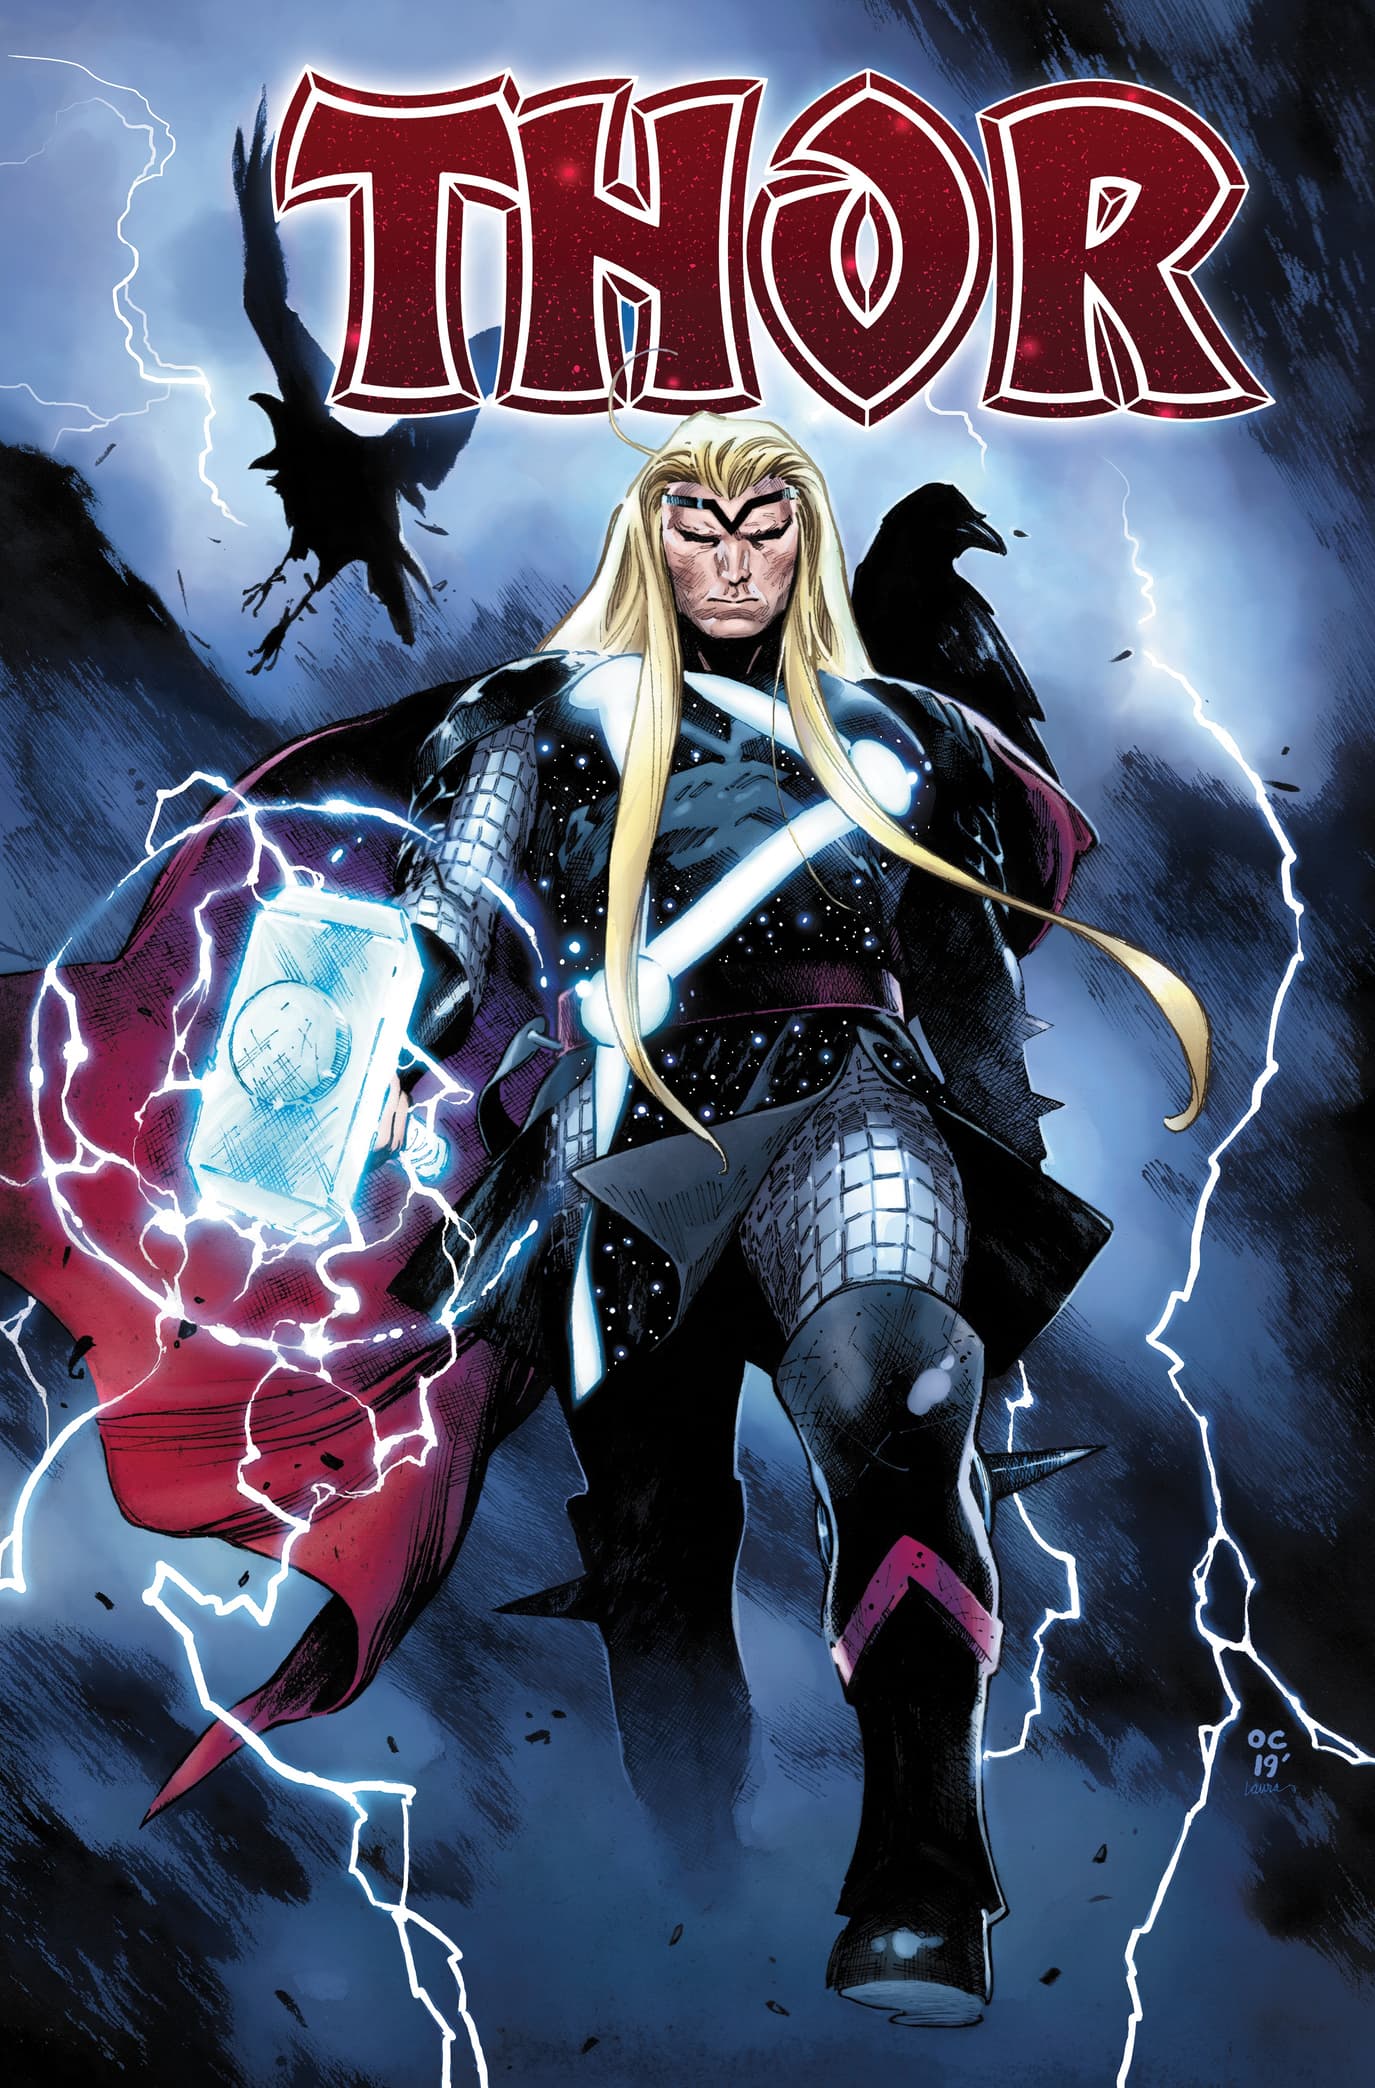 Cover art by Olivier Coipel with colors by Laura Martin